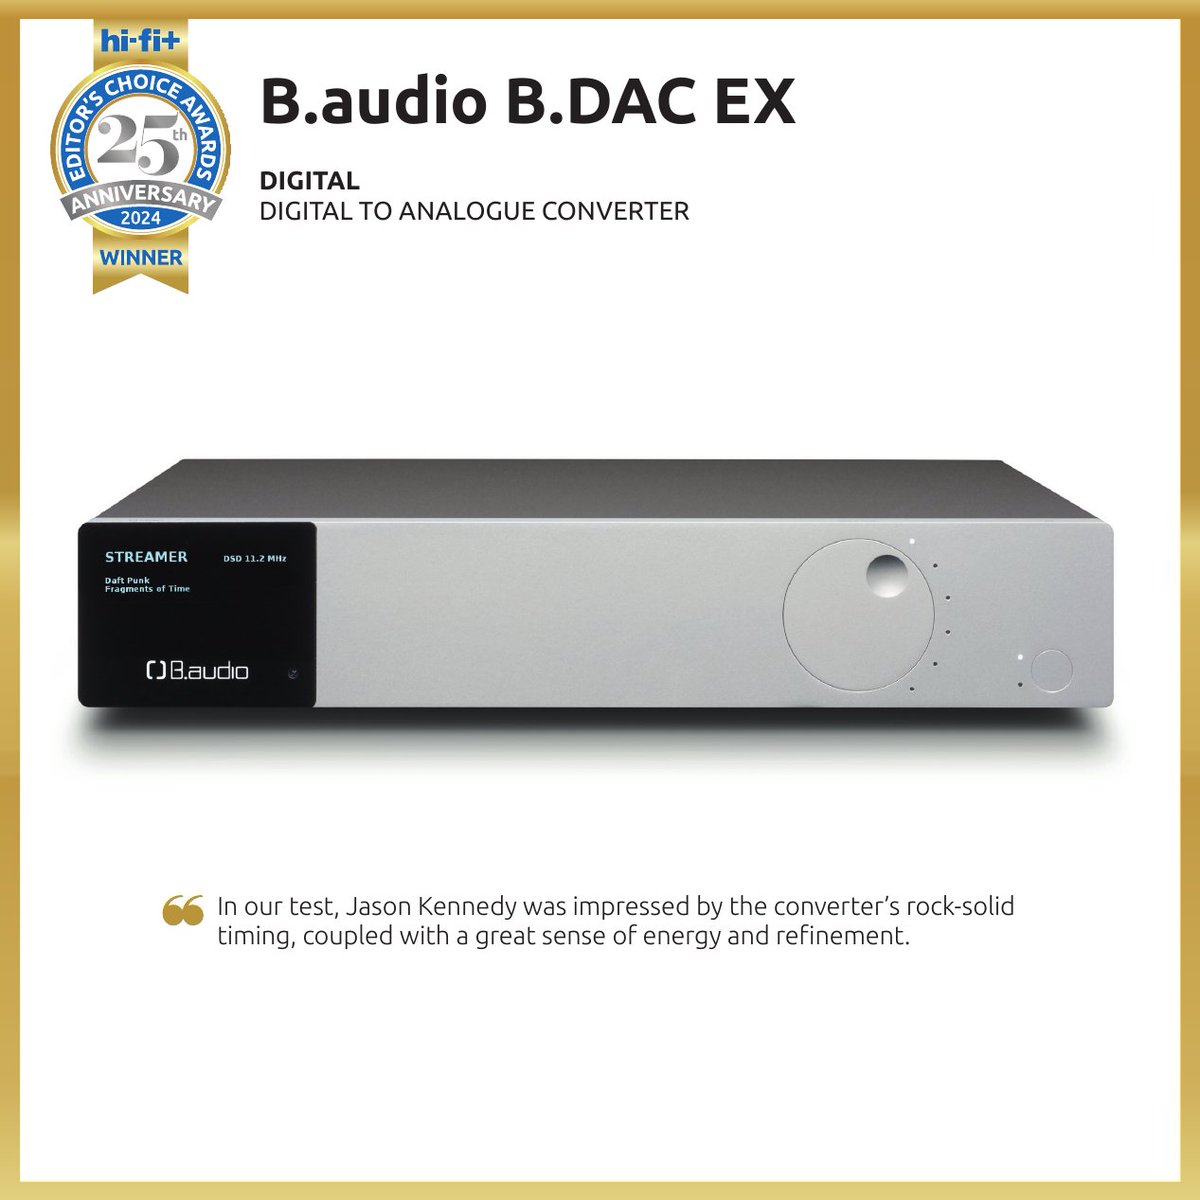 We are very pleased that our reference streaming dac - the B.dac EX - has been selected by Hi-fi+ as the winner of the Editor's choice 25th anniversary special award in the DAC category.
#awardwinner #hifiplus #audioreview #dac #streamingdac #daconverter #technology #madeinfrance